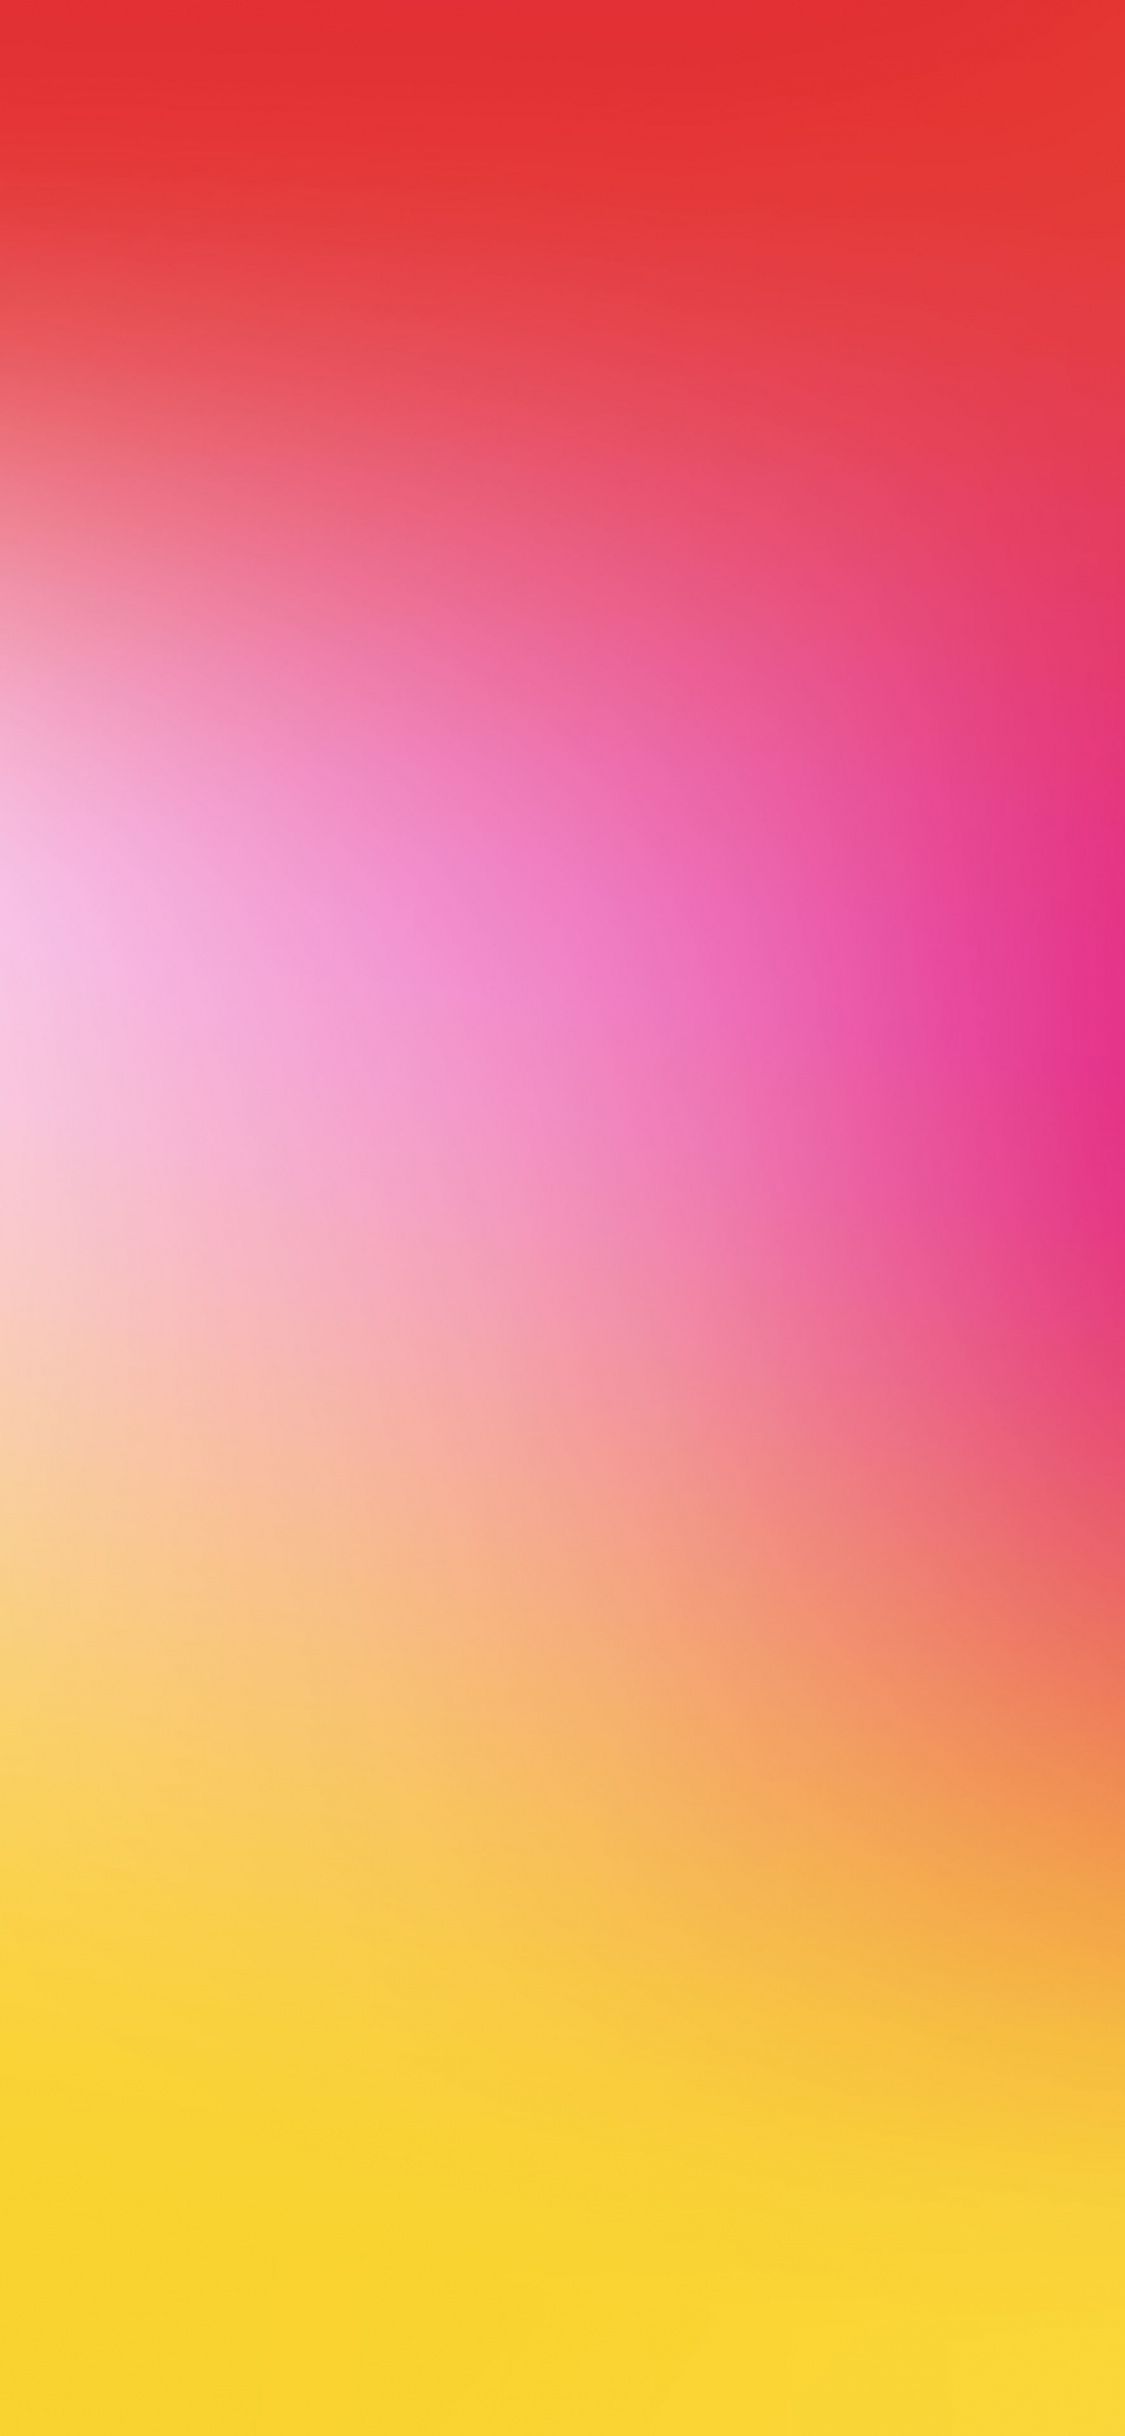 Gradient, Yellow And Pink Colors, Abstract, Wallpaper